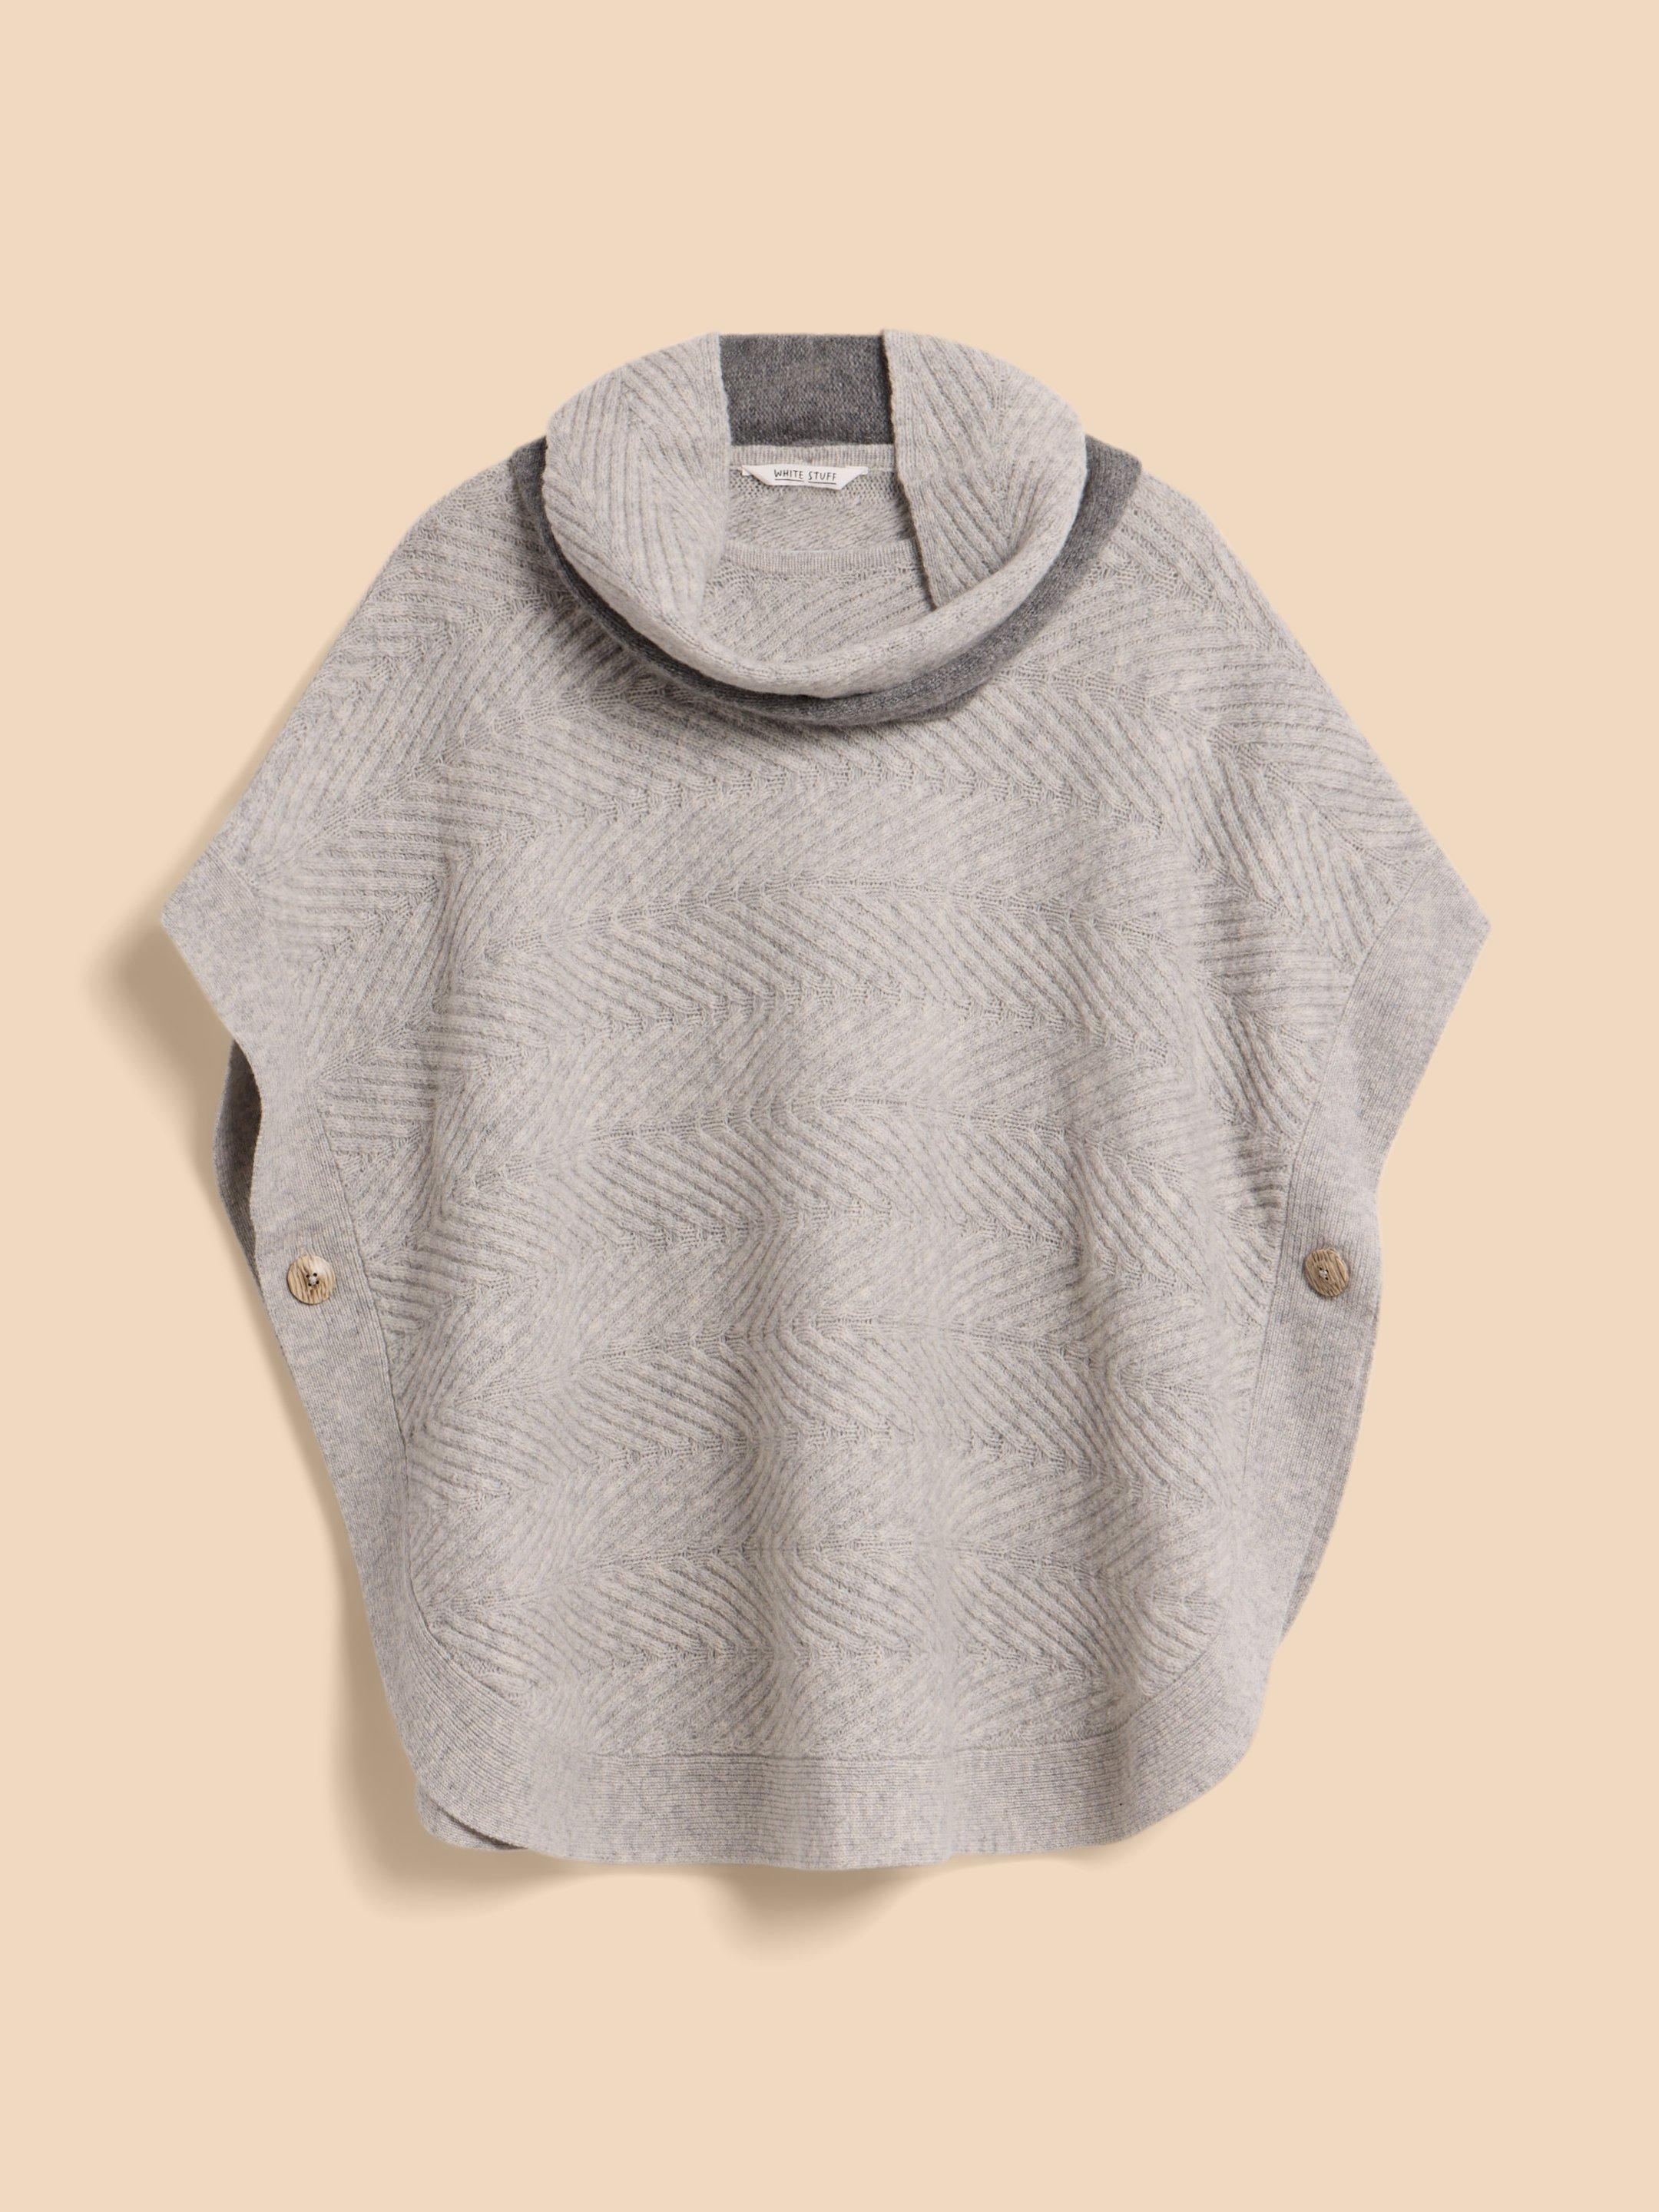 Florence Knitted Poncho in GREY MARL - FLAT FRONT